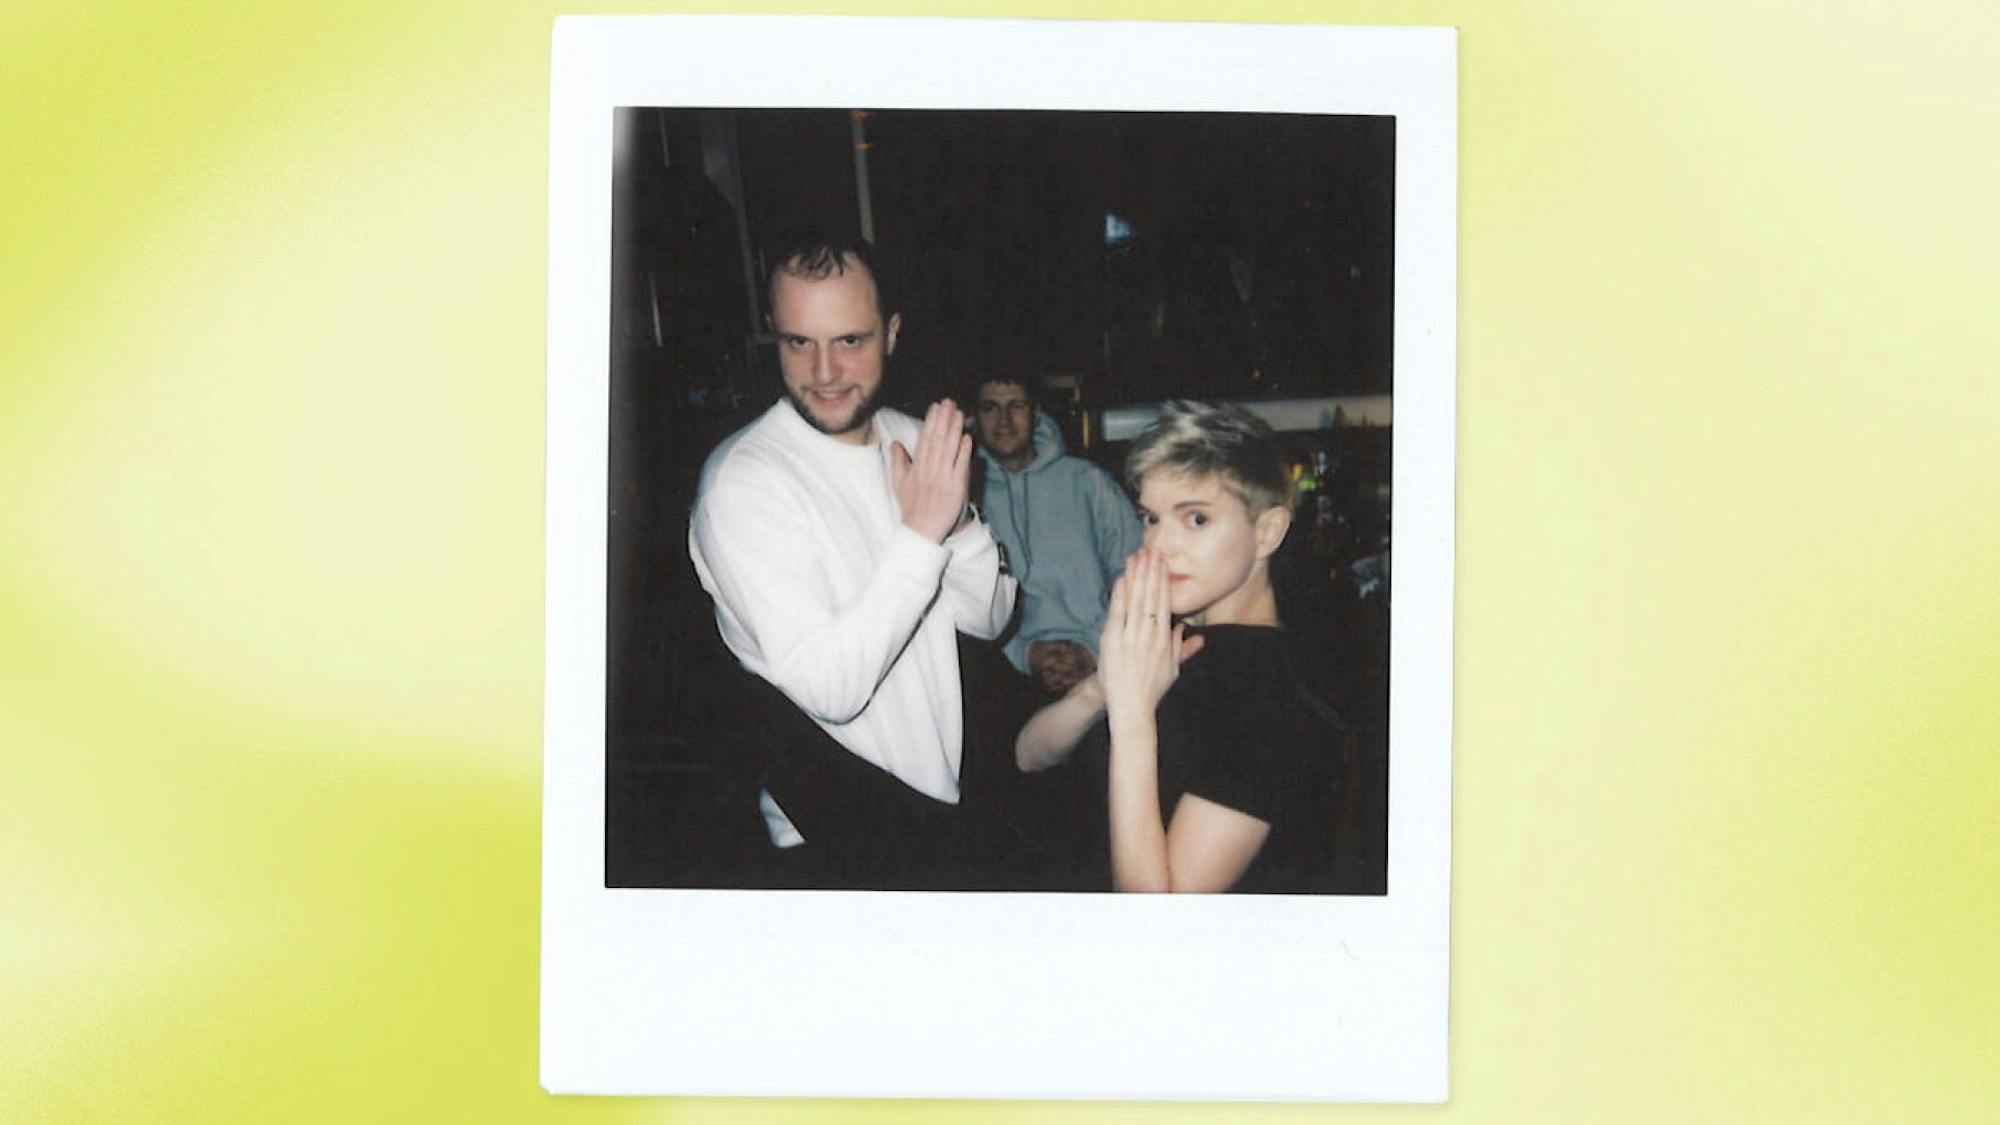 Mae with Jack Berry and friend in this polaroid shot. Mae wears a black t-shirt and Jack Berry wears a long-sleeved white shirt.